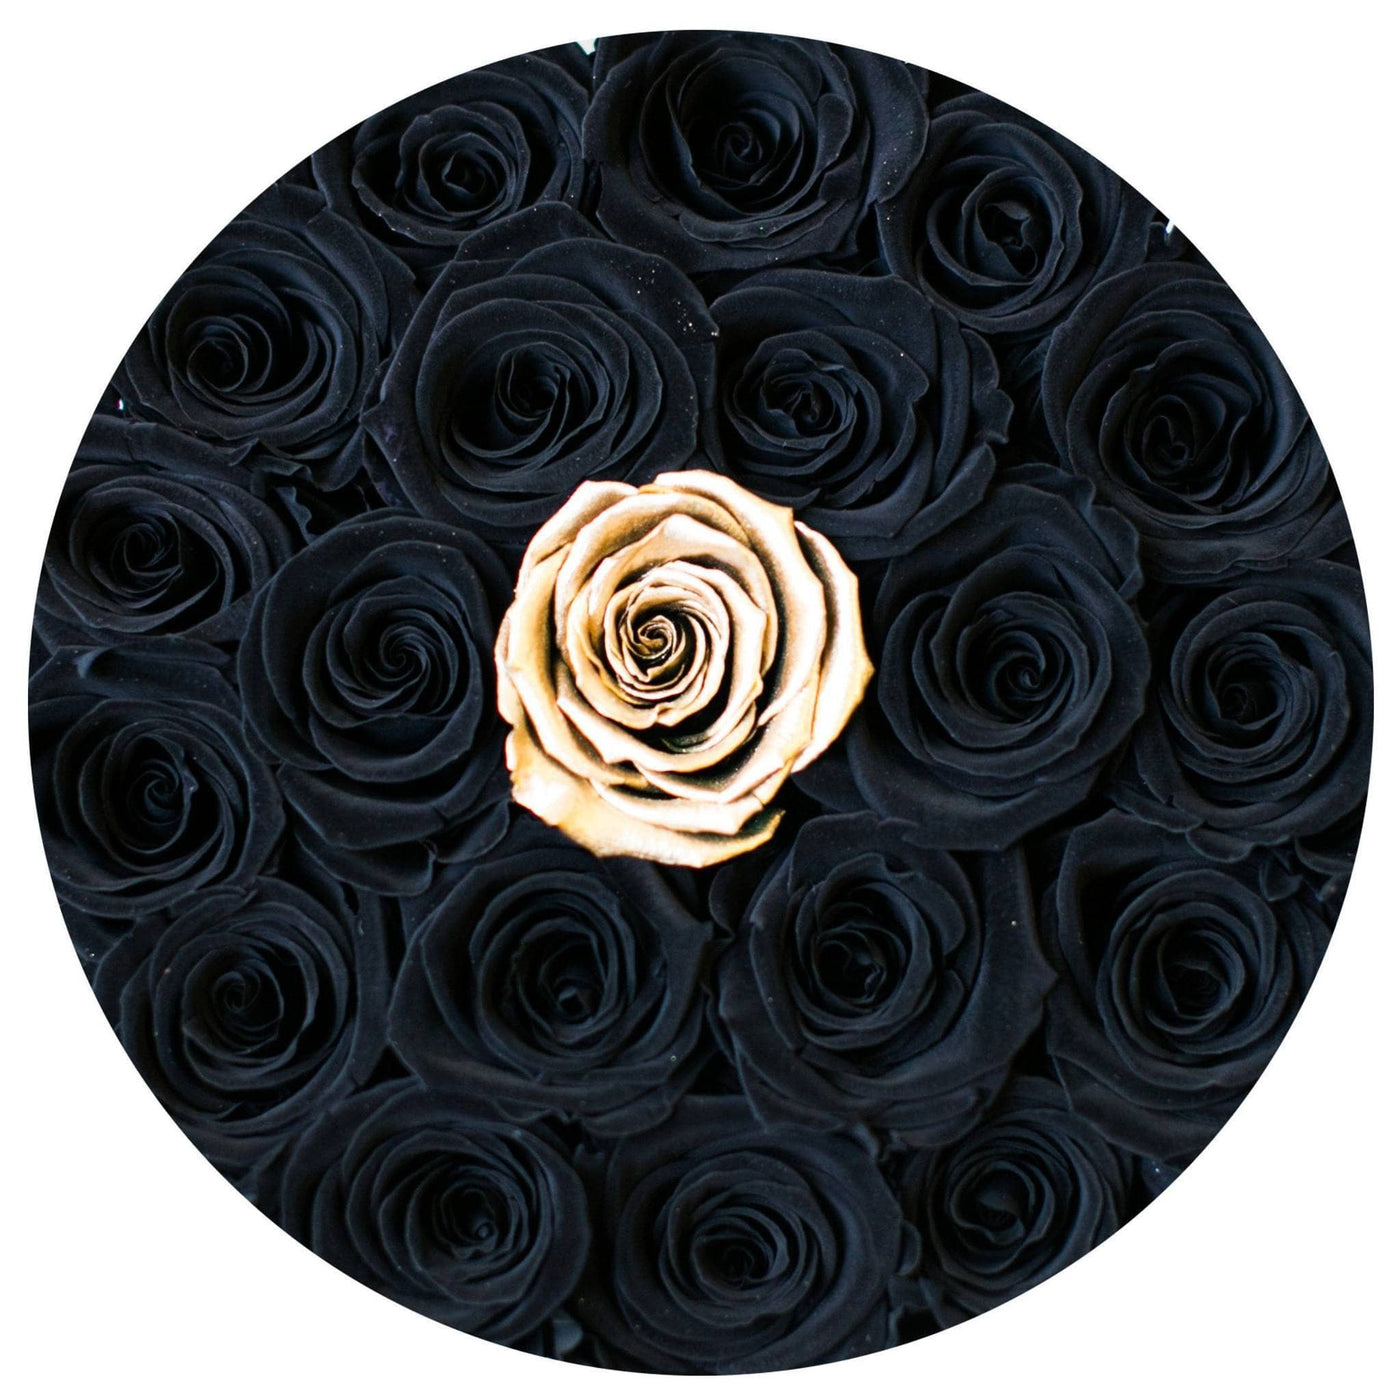 Black & 24k Gold Roses That Last A Year - Classic Rose Box